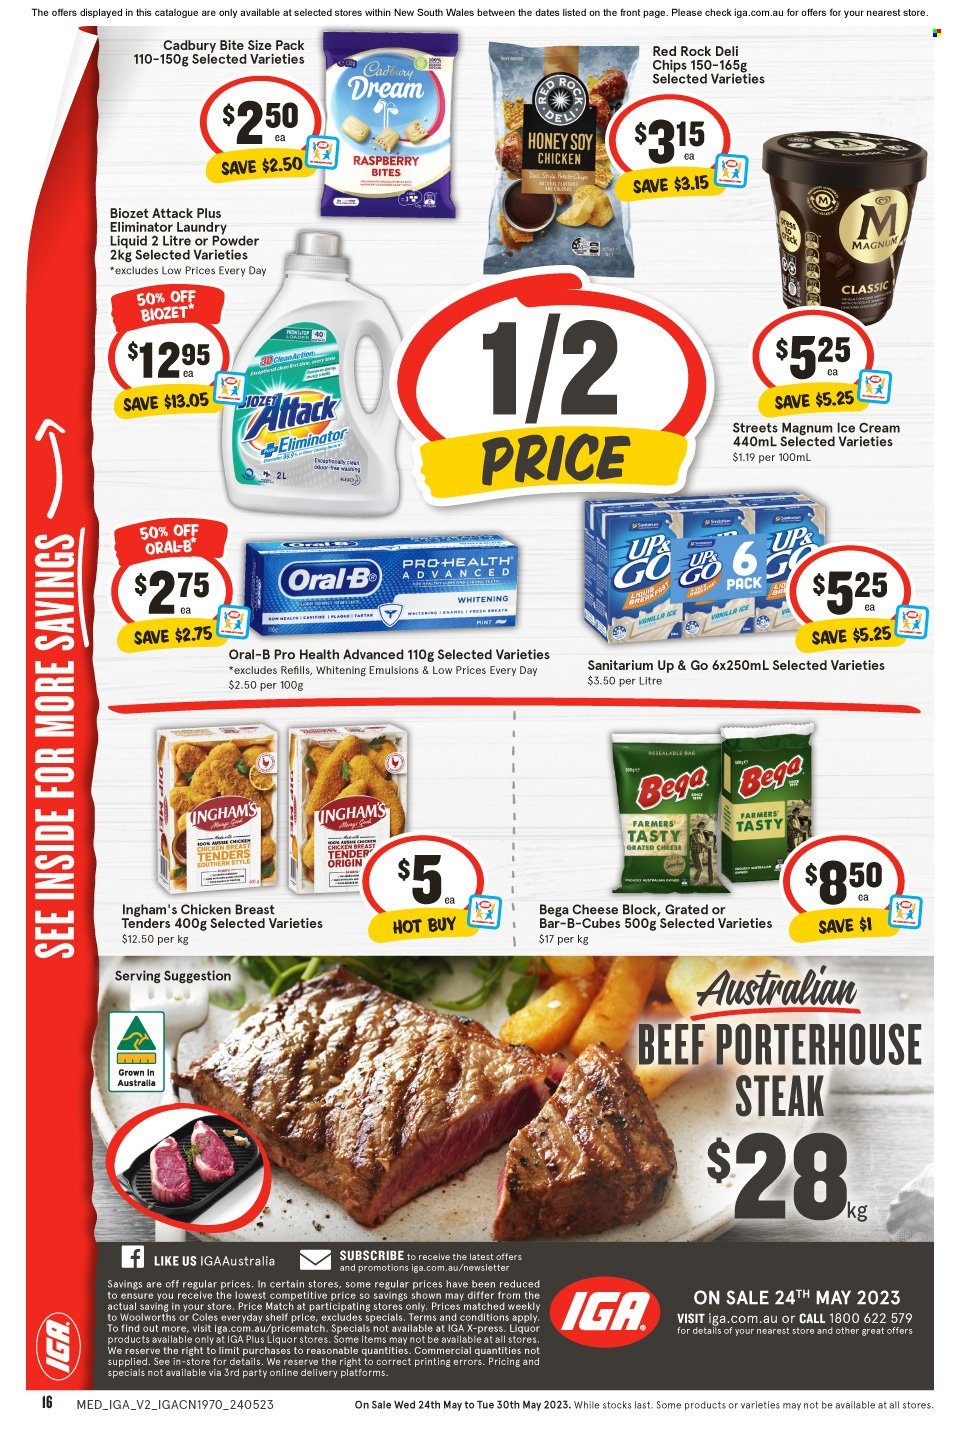 IGA Catalogue - 24 May 2023 - 30 May 2023 - Sales products - Ace, chicken tenders, grated cheese, ice cream, Cadbury, chips, honey, chicken meat, chicken, steak, laundry detergent, Oral-B. Page 2.